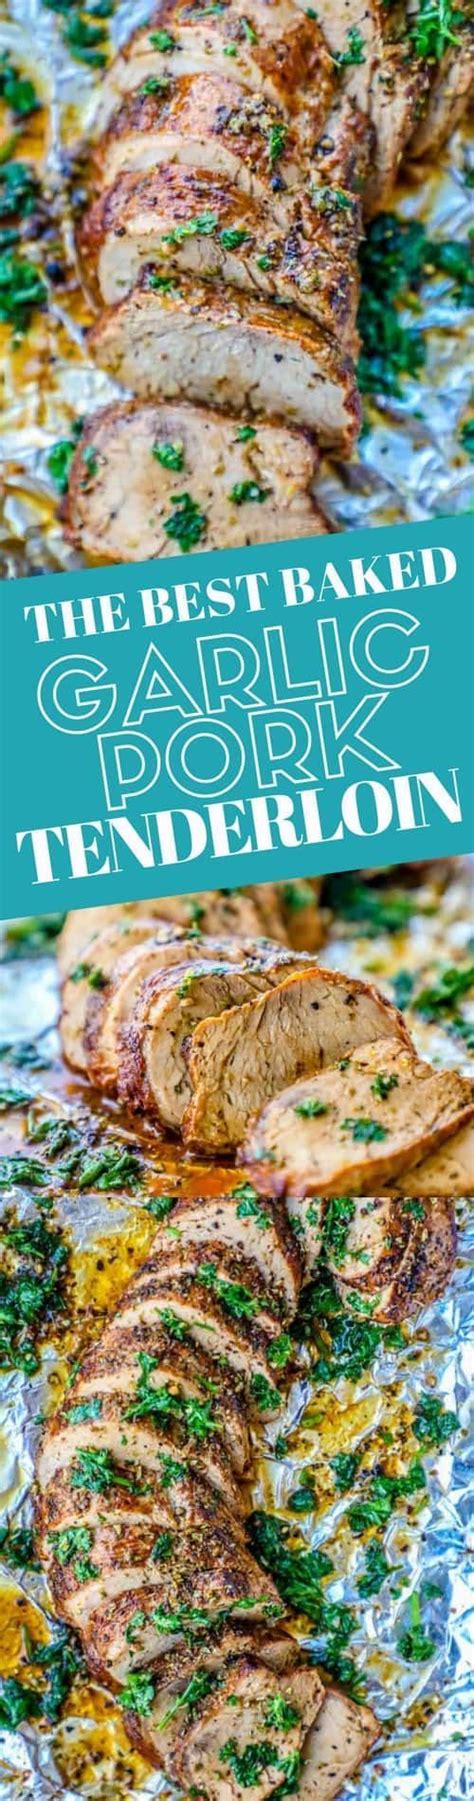 You will be surprised how low in calories and fat this delicious pork tenderloin roast recipe is! This is the Best Baked Garlic Pork Tenderloin recipe ever... so easy, delicious, and bursting ...